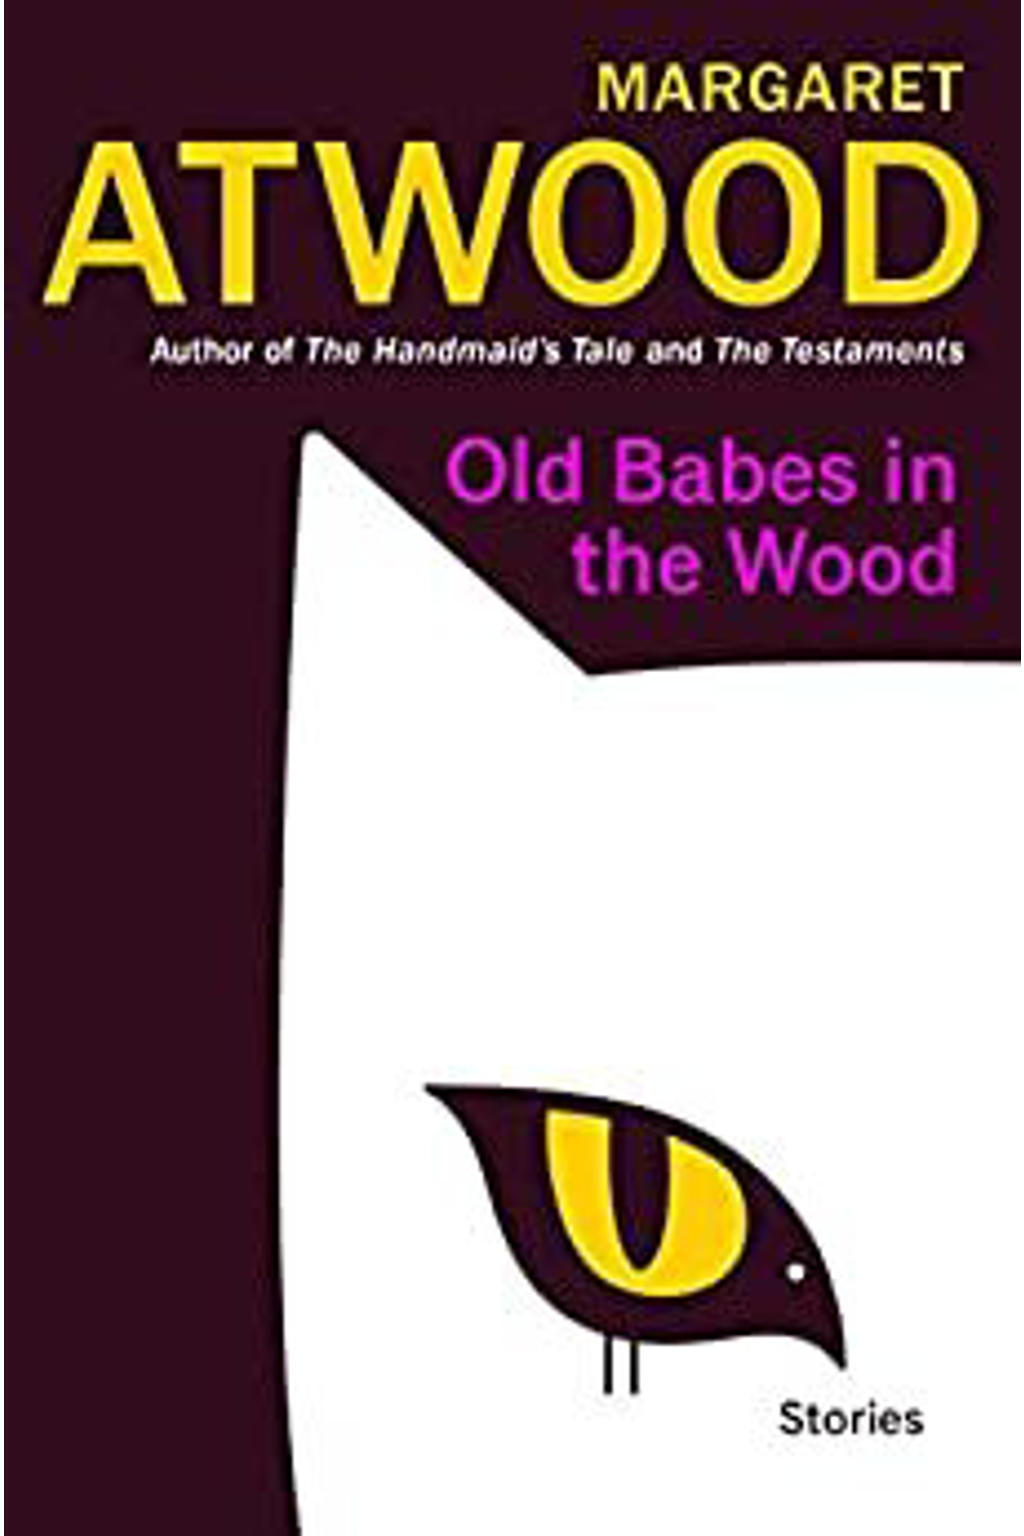 Old Babes in the Wood - Margaret Atwood